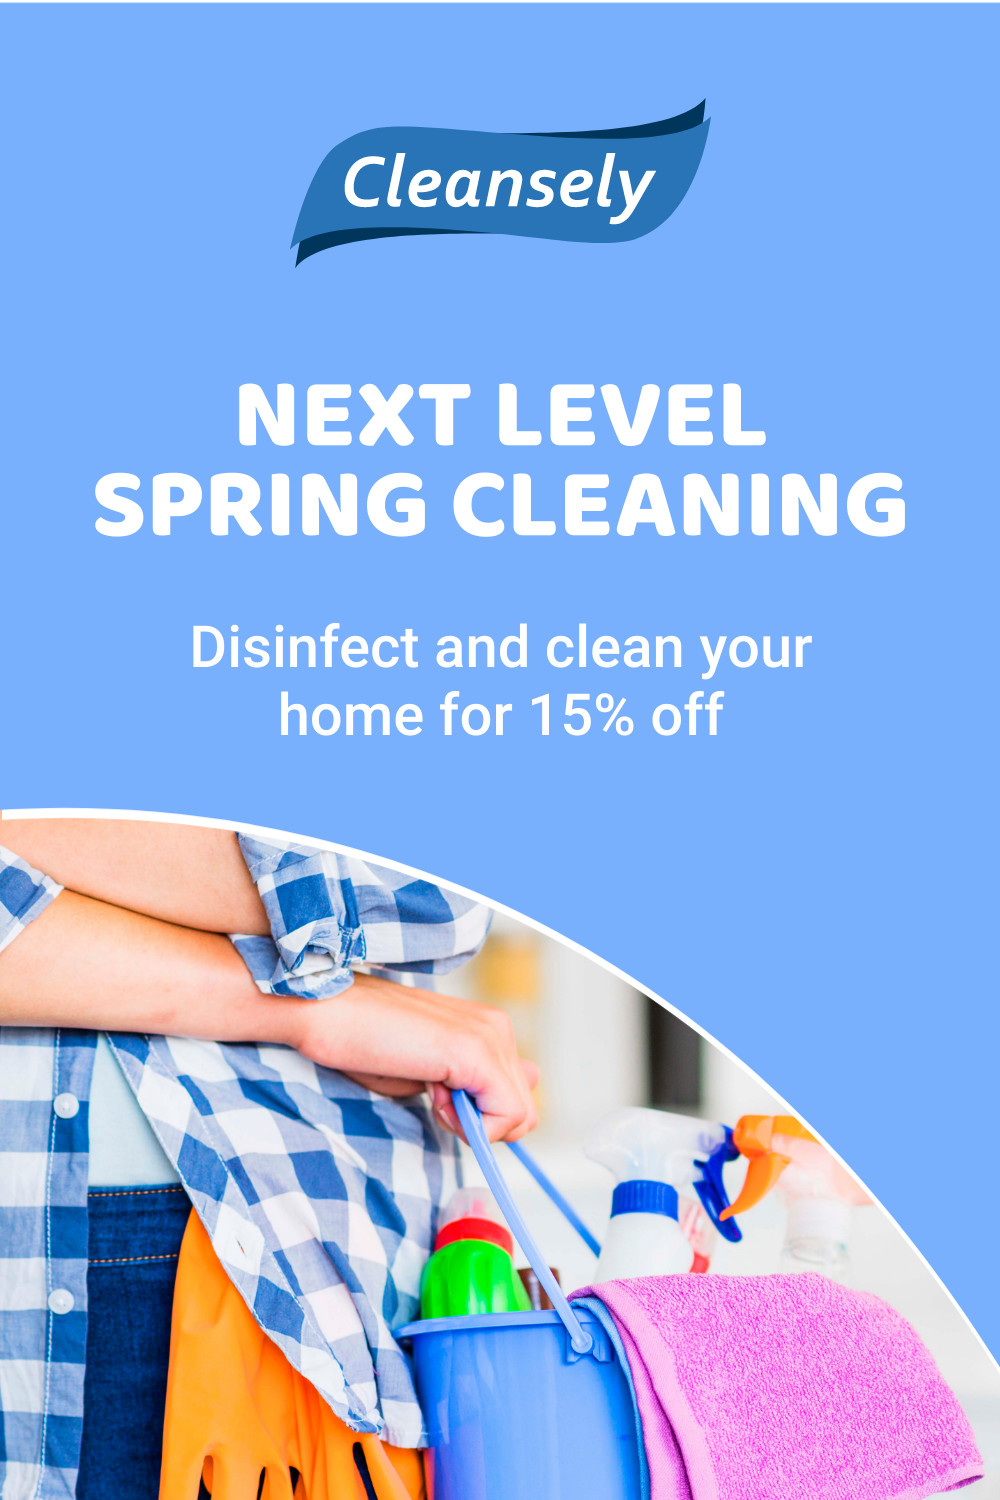 Next Level Spring Cleaning